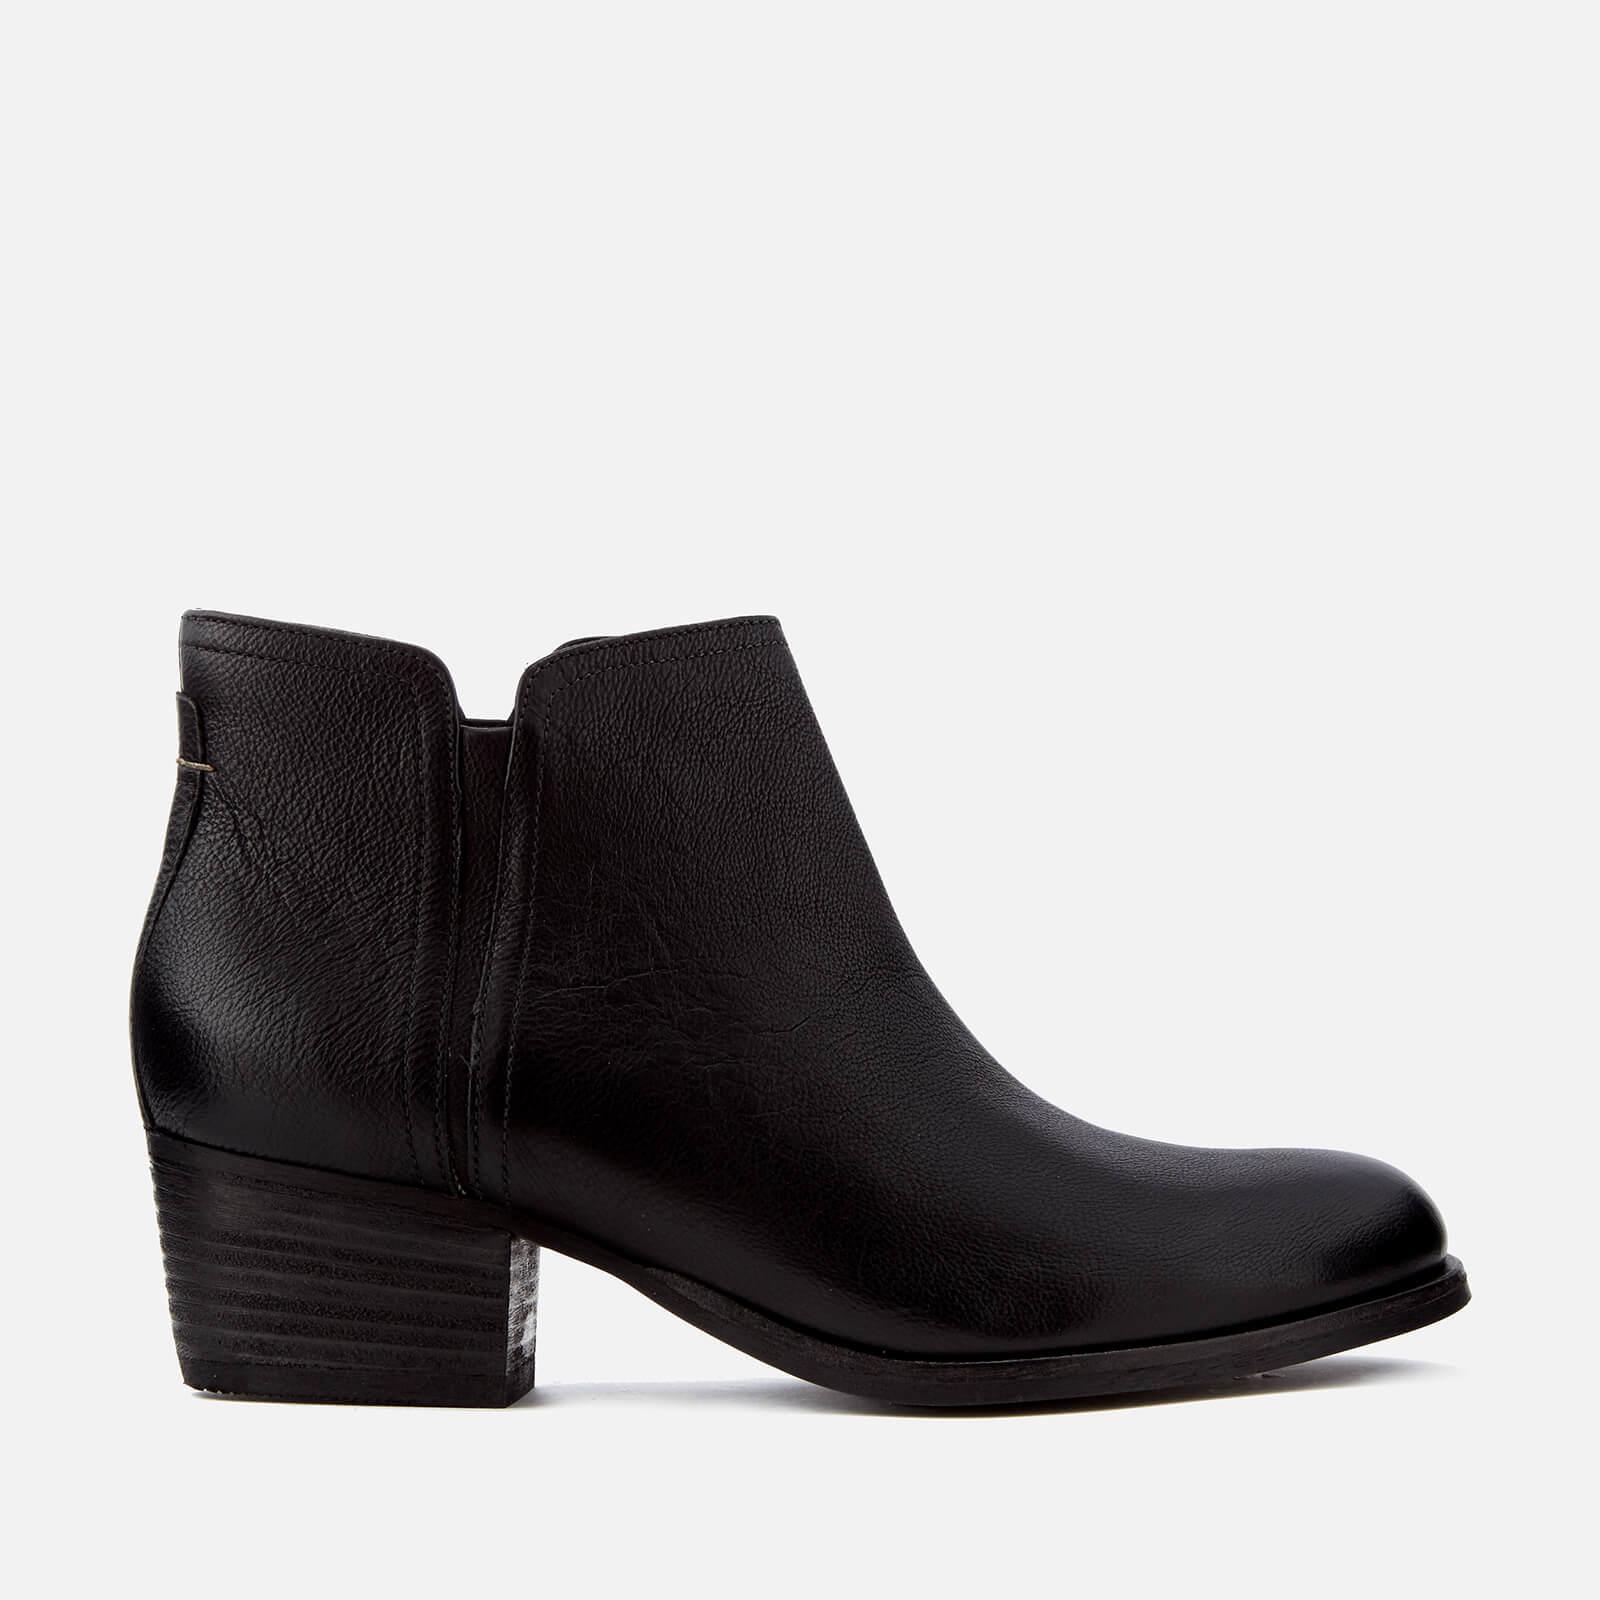 Clarks Women's Maypearl Ramie Leather Ankle Boots in Black - Lyst